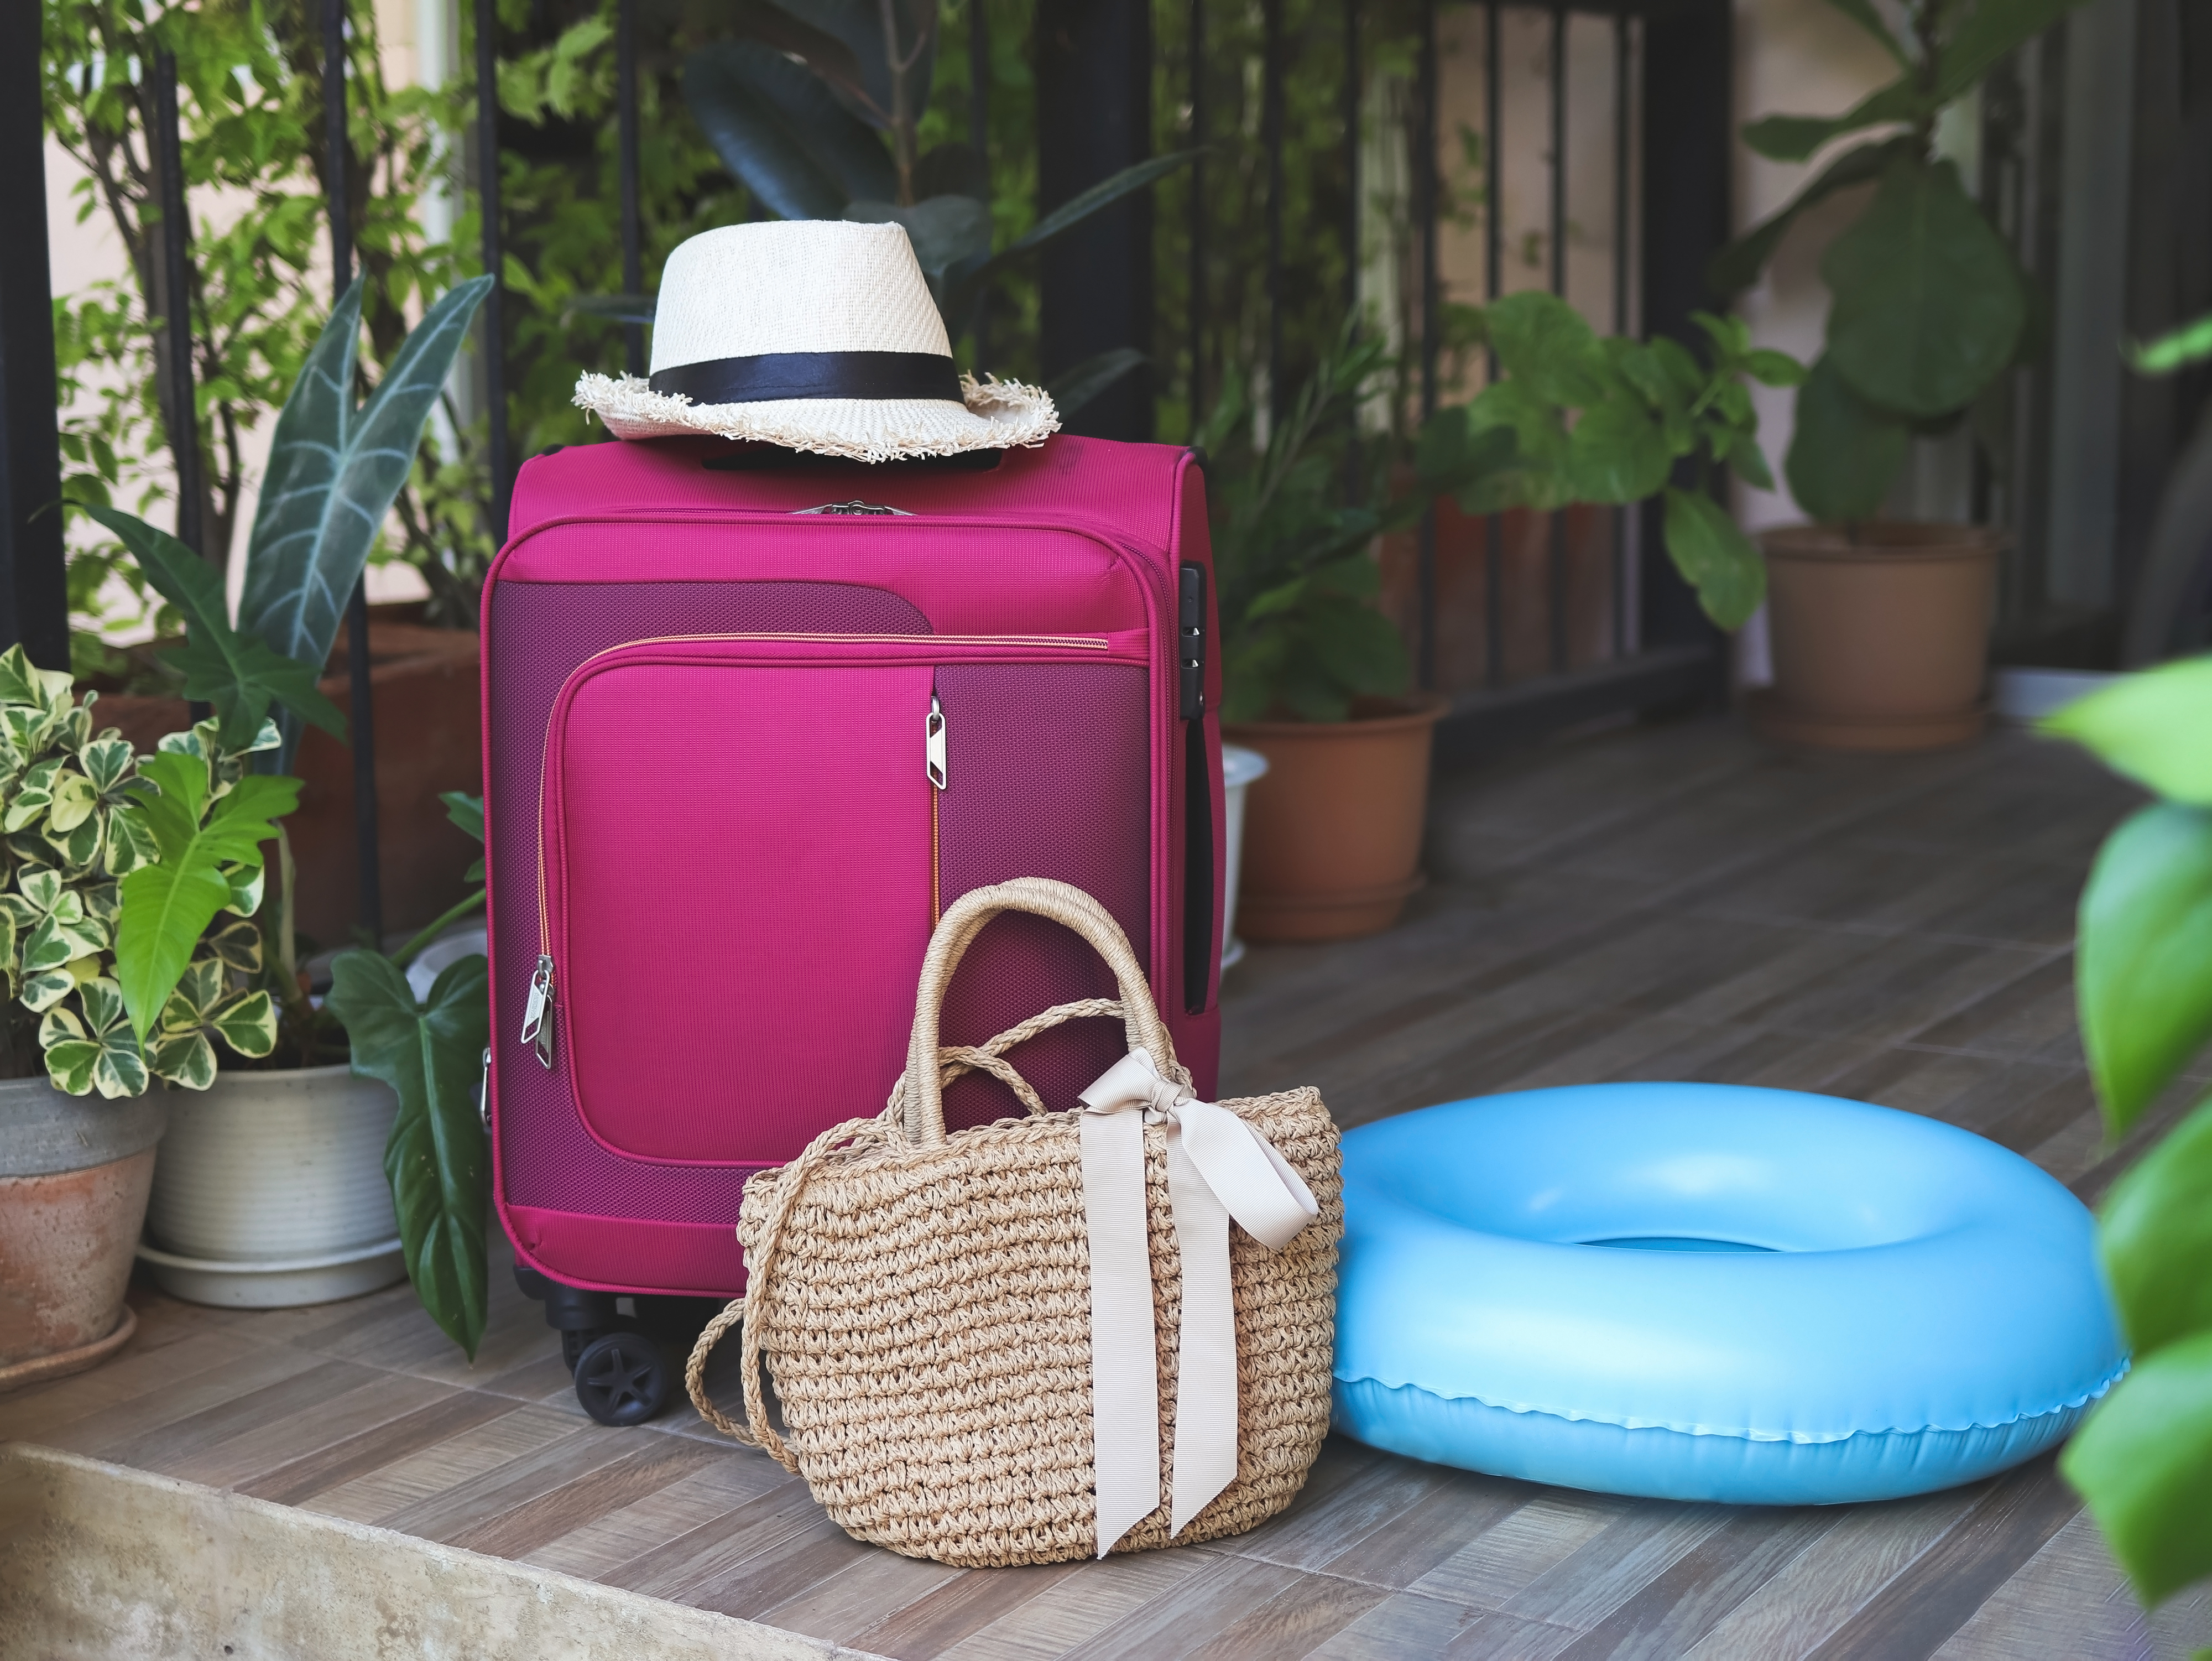 An image of a pink and plum colored suitcase, with a hessian bag and a blue rubber ring next to it. There is a straw hat on top of the suitcase.